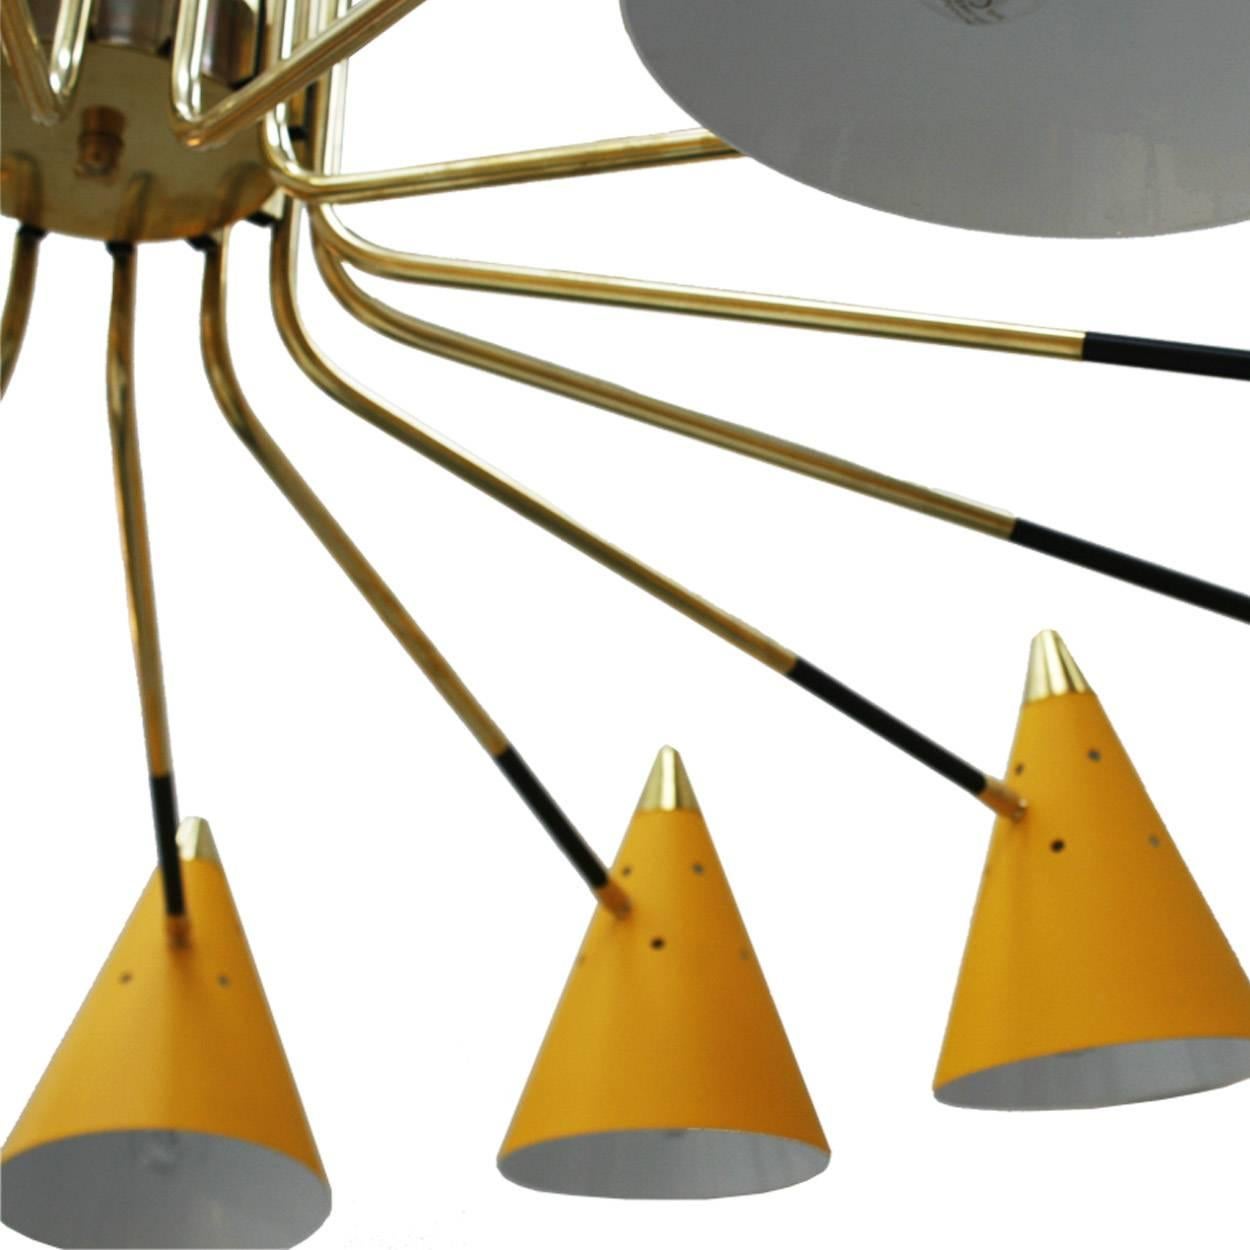 In the style Mid-Century Modern pendant lamp. Composed of fourteen bulbs, made of yellow lacquered metal conical shape cups and brass structure. Made in Italy.

Our main target is customer satisfaction, so we include in the price for this item